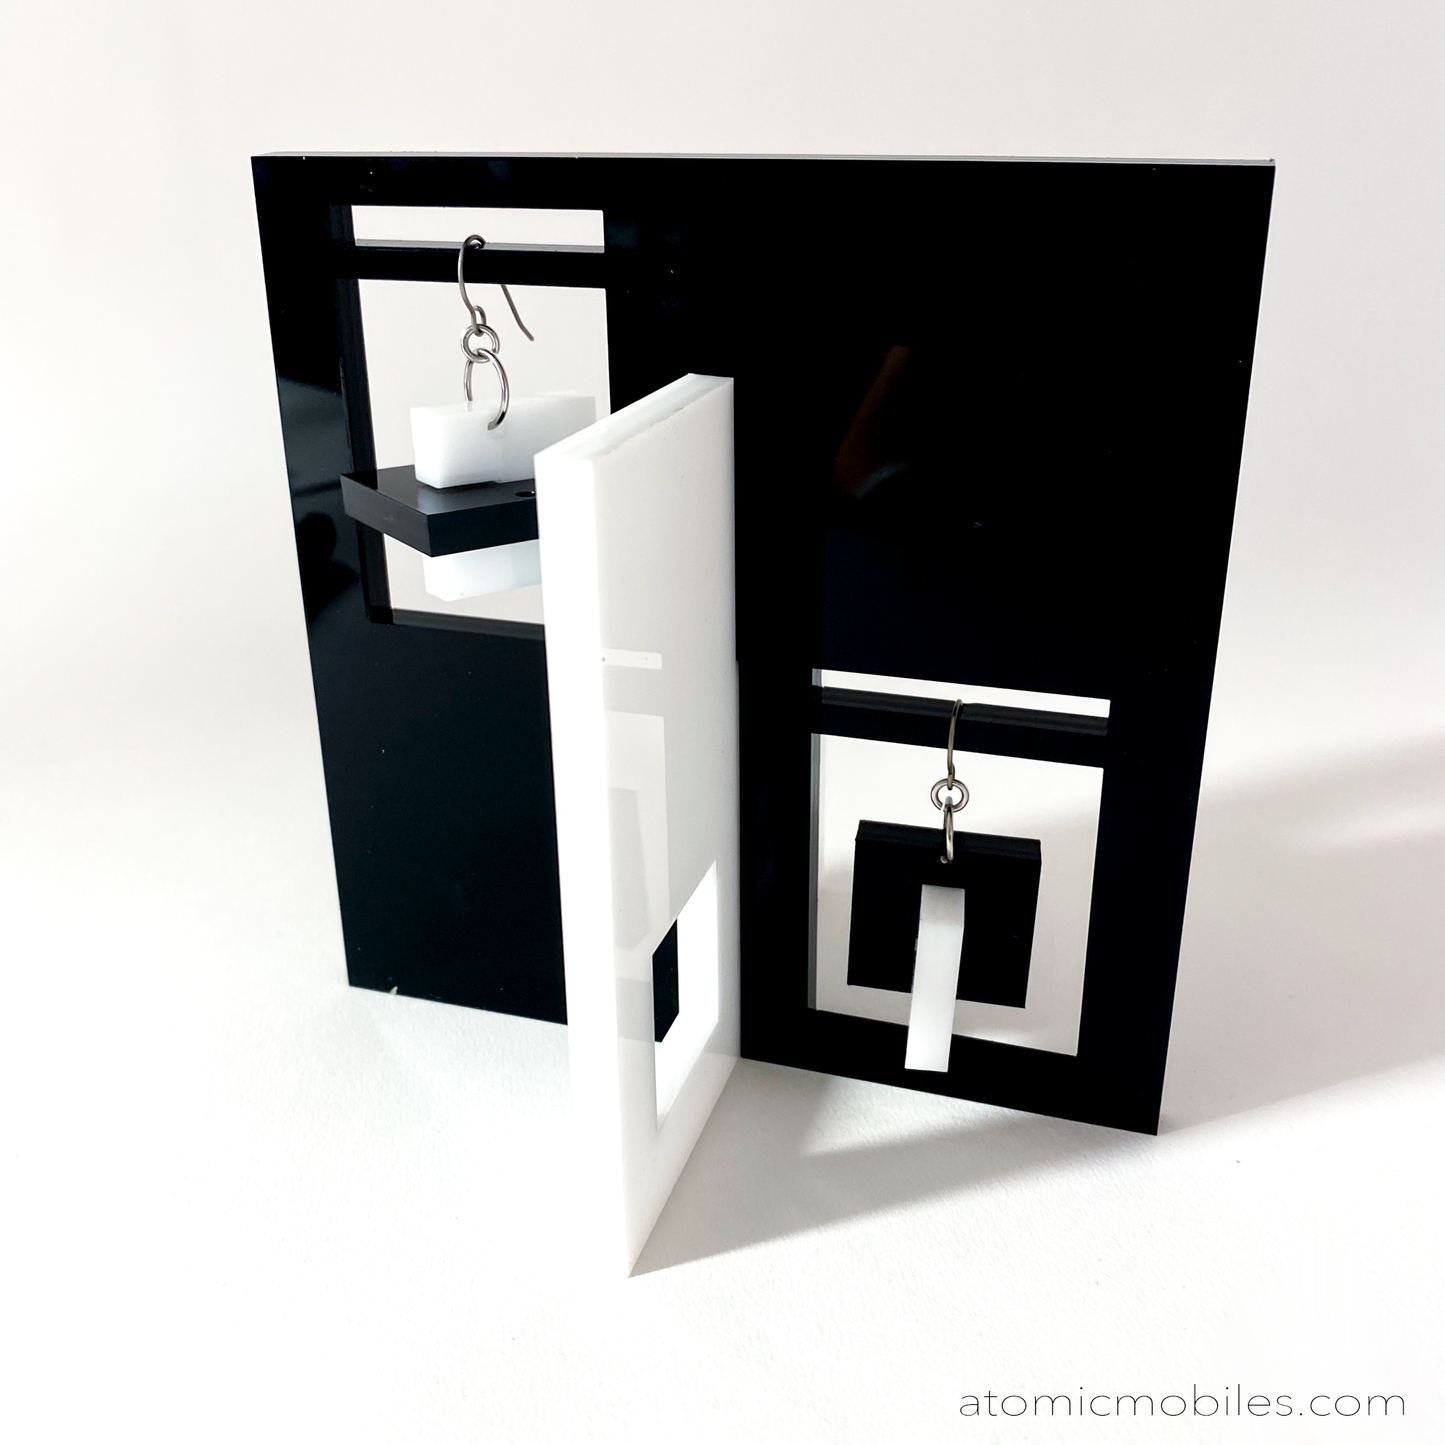 Bauhaus Inspired Moderne Earrings and Art Stabile Set in black and white - modern art sculpture stabile by AtomicMobiles.com